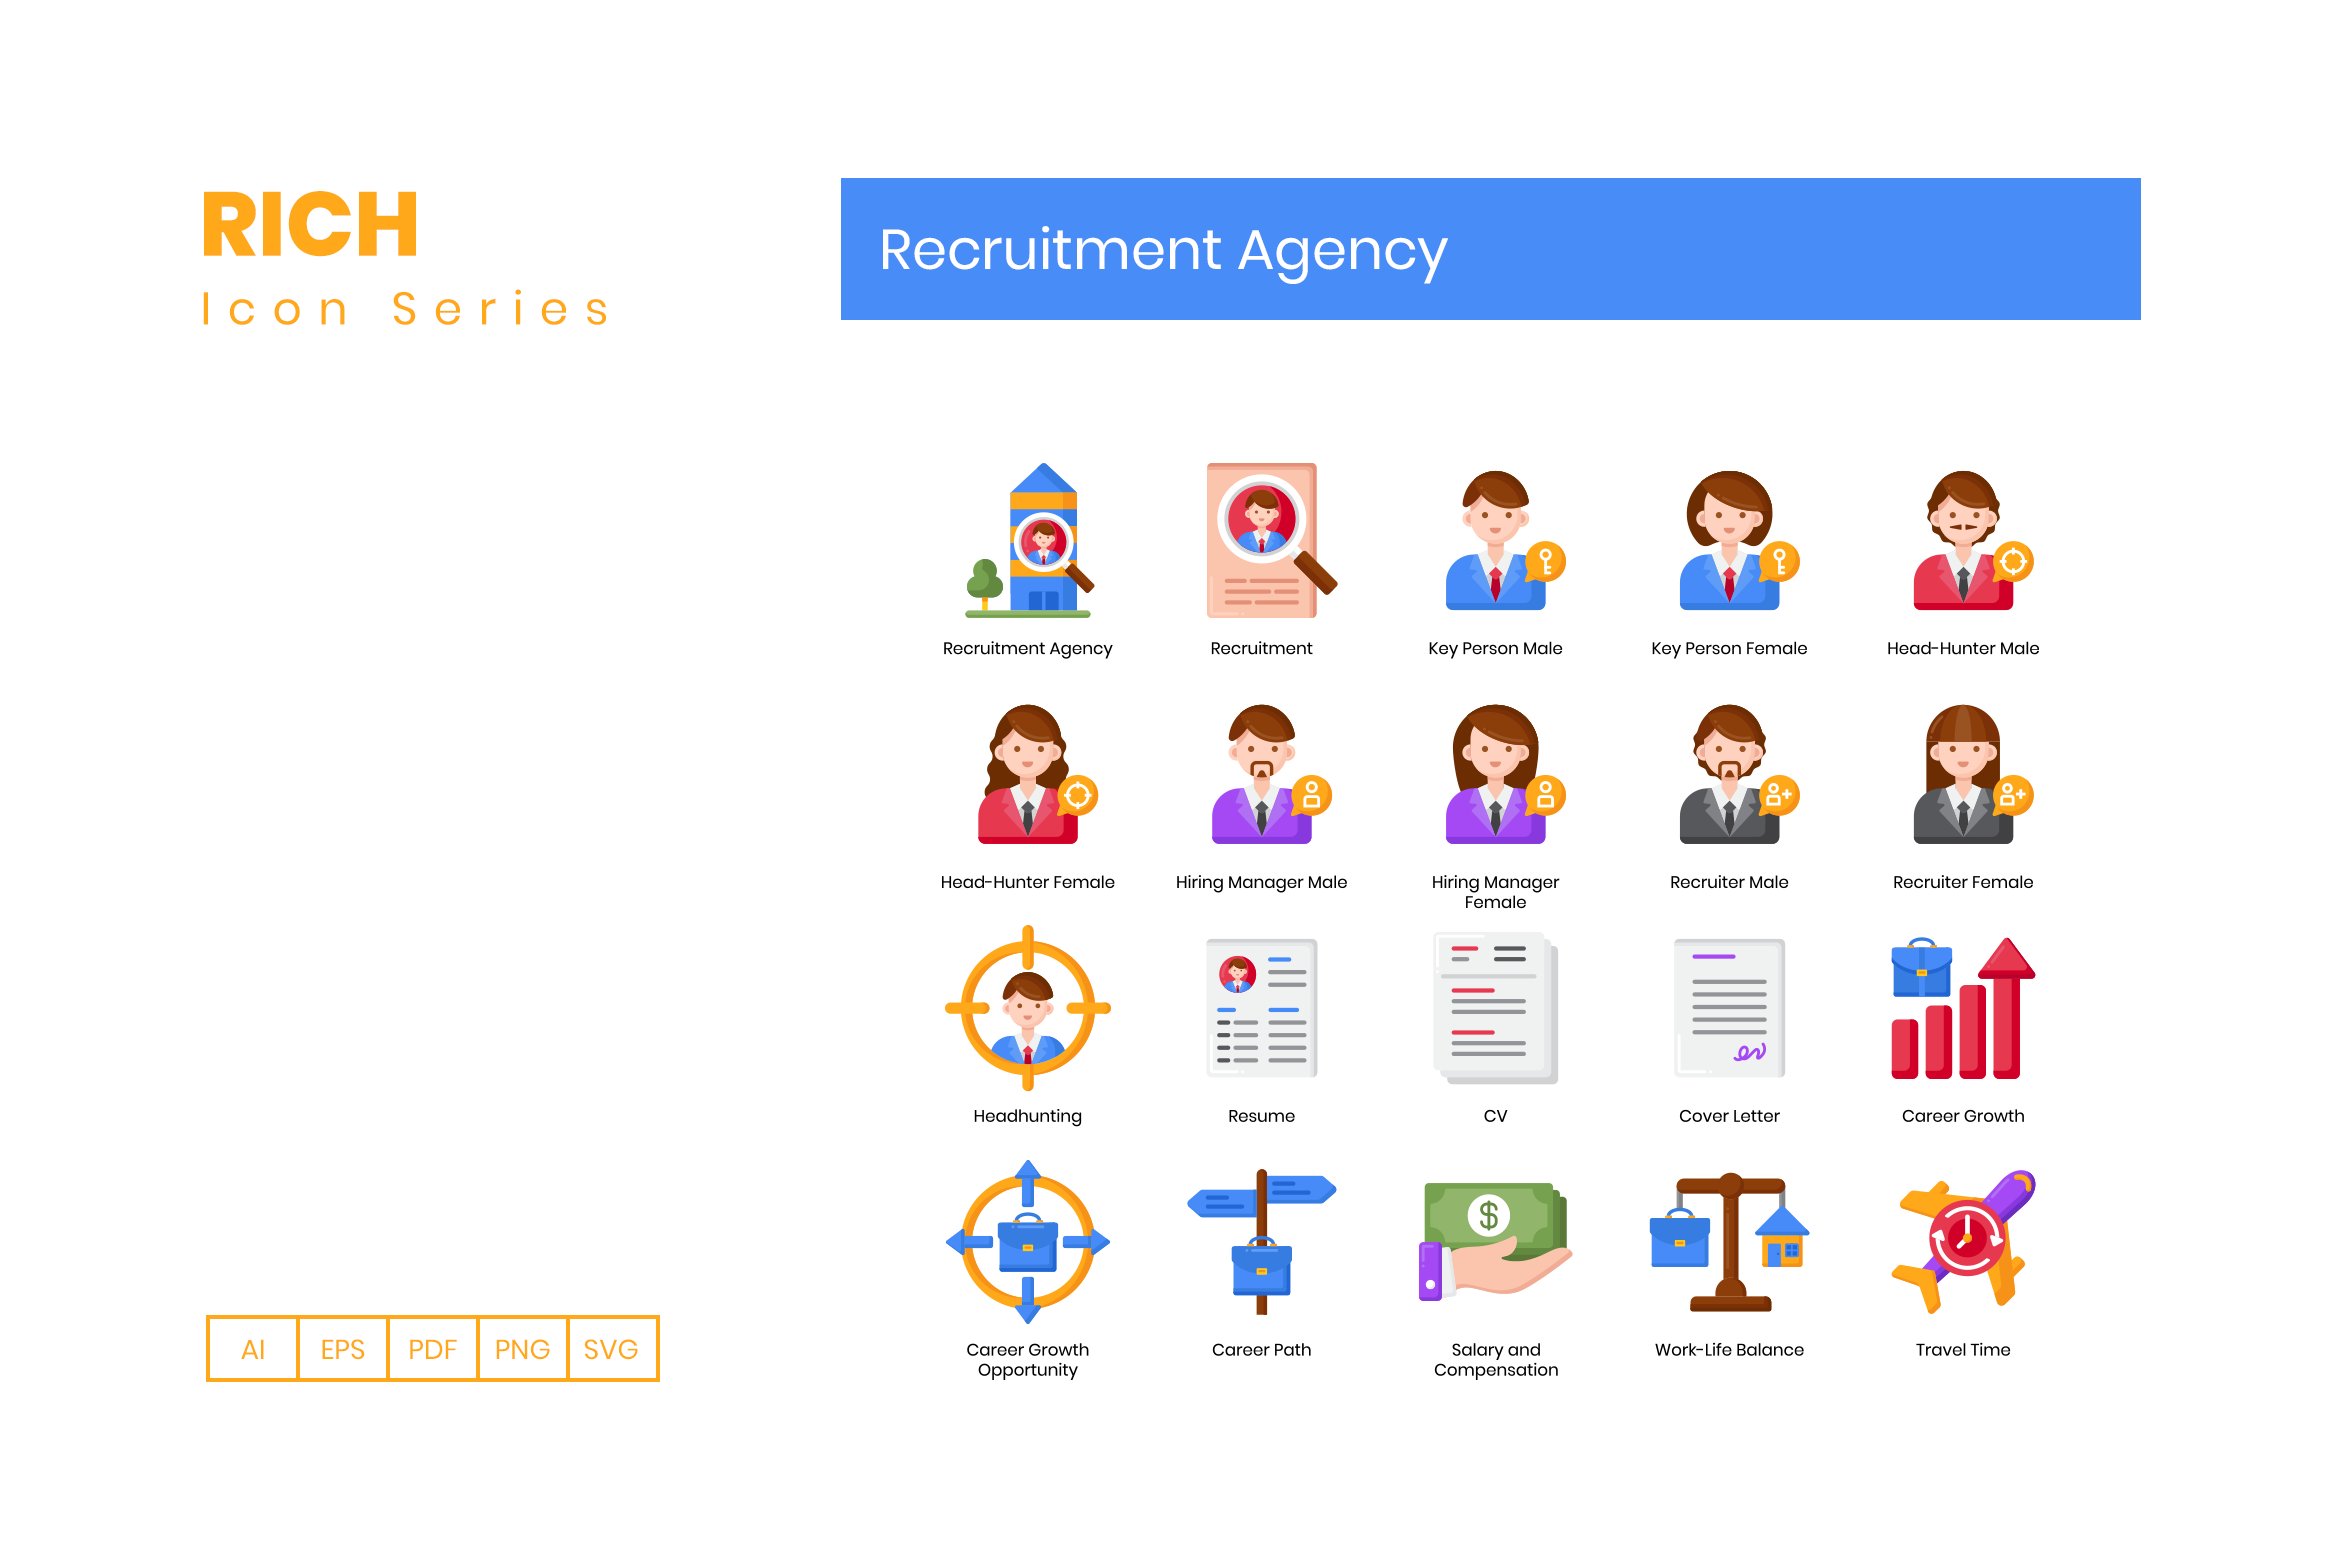 90 Recruitment Agency Icons | Rich preview image.